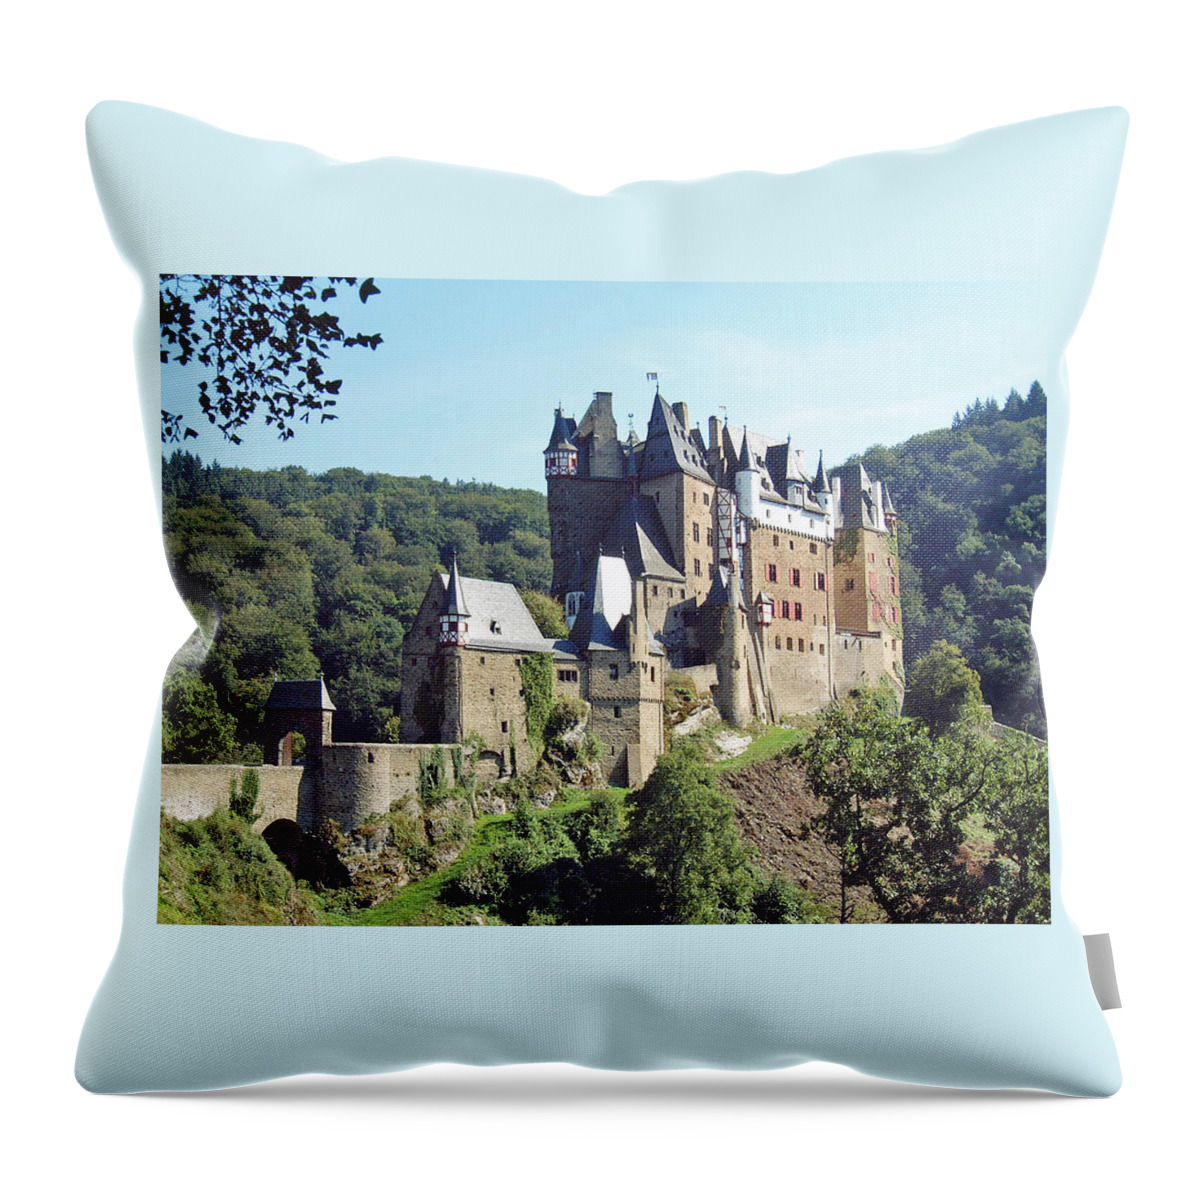 Europe Throw Pillow featuring the photograph Burg Eltz in Profile by Joseph Hendrix